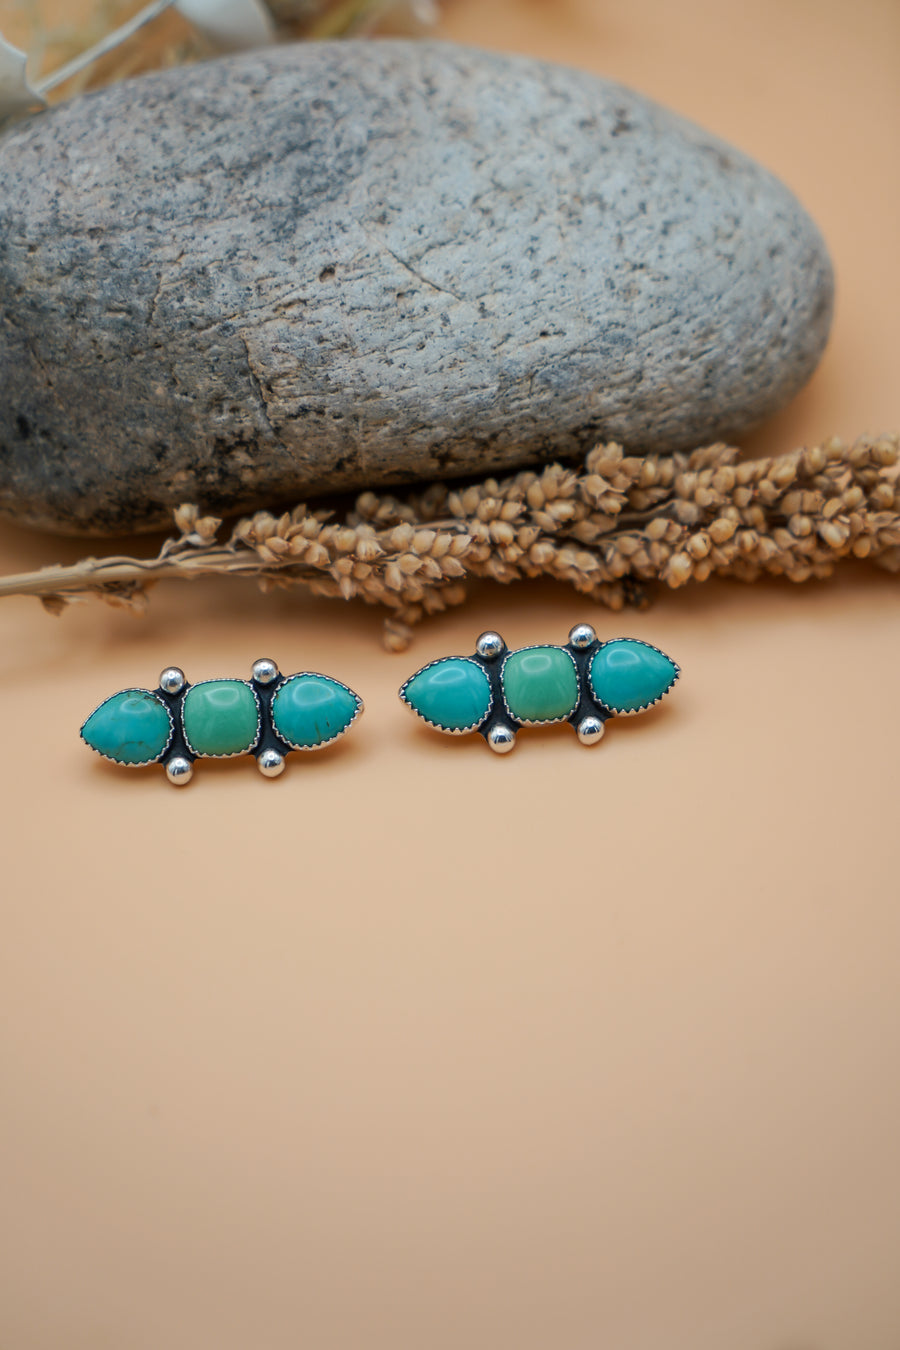 Ear Crawlers in Kingman Turquoise and Variscite